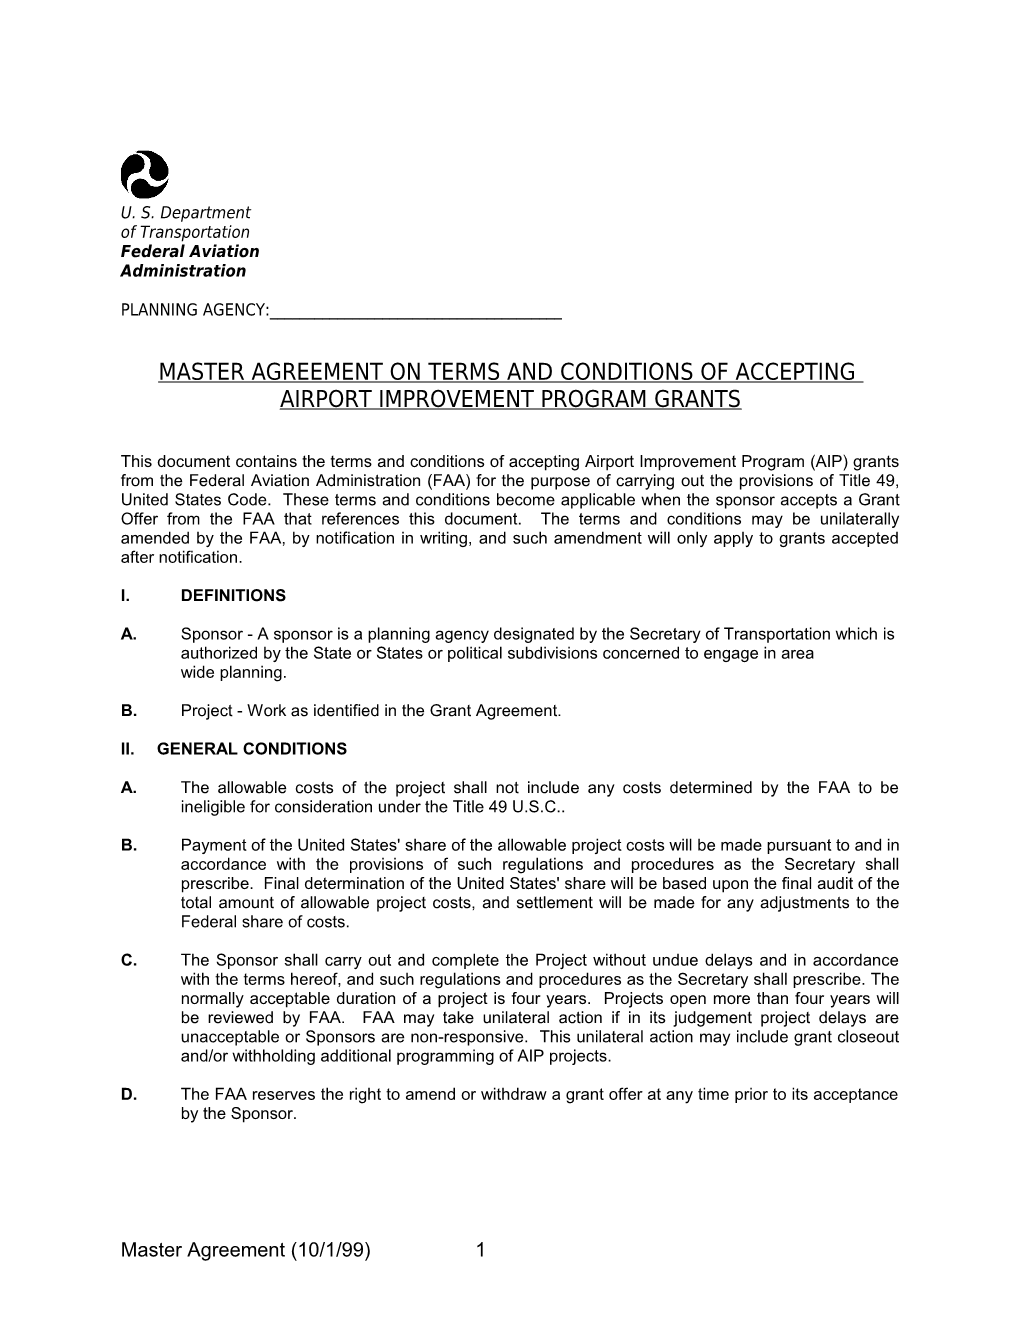 Master Agreement Terms and Conditions of Accepting Airport Improvement Program Grants